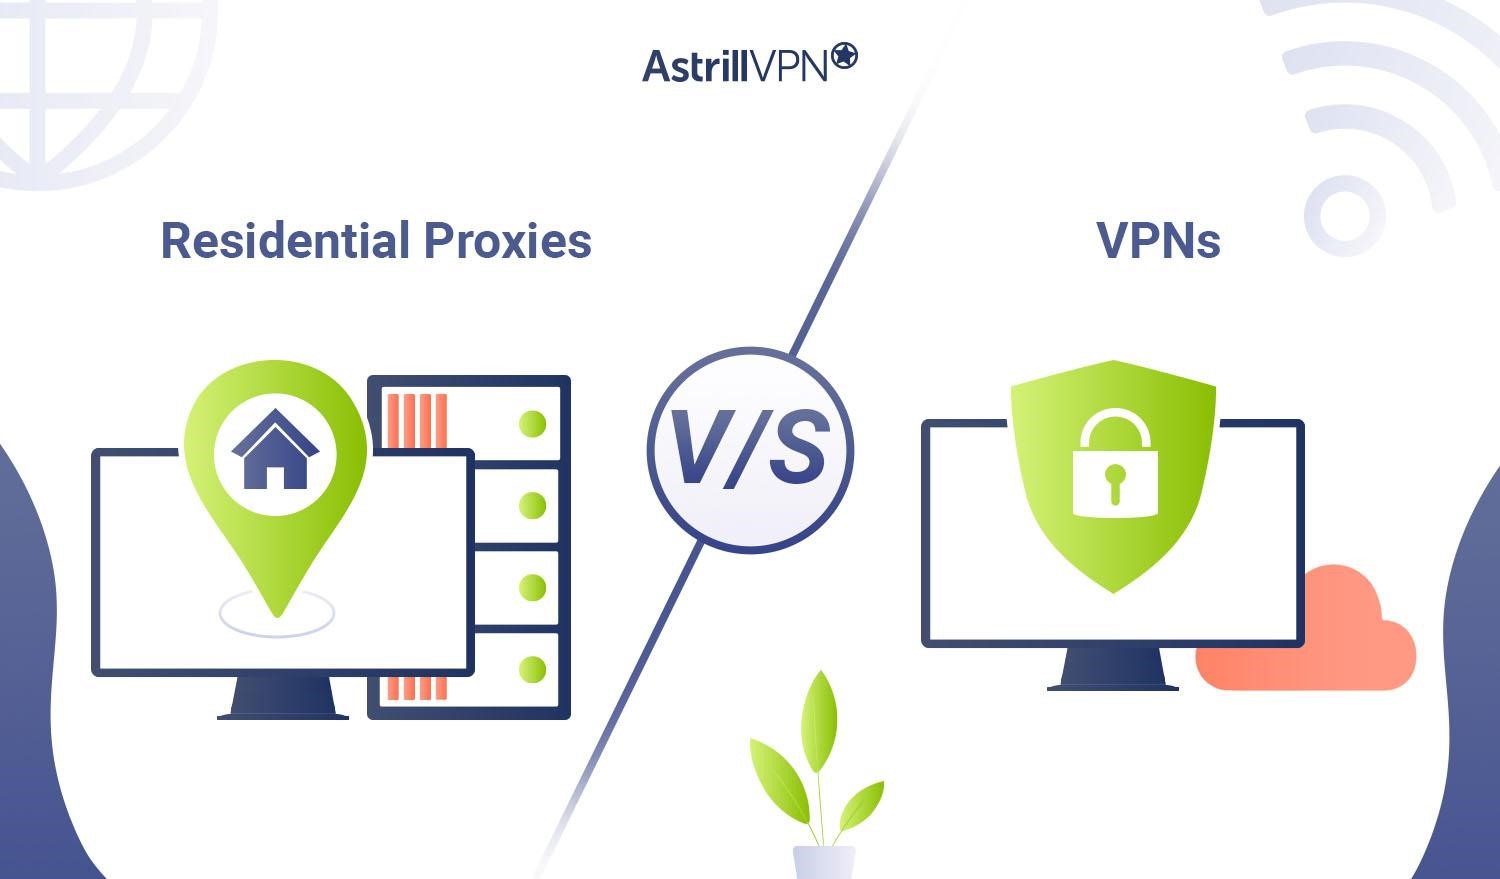 Differences between residential Proxies and VPNs